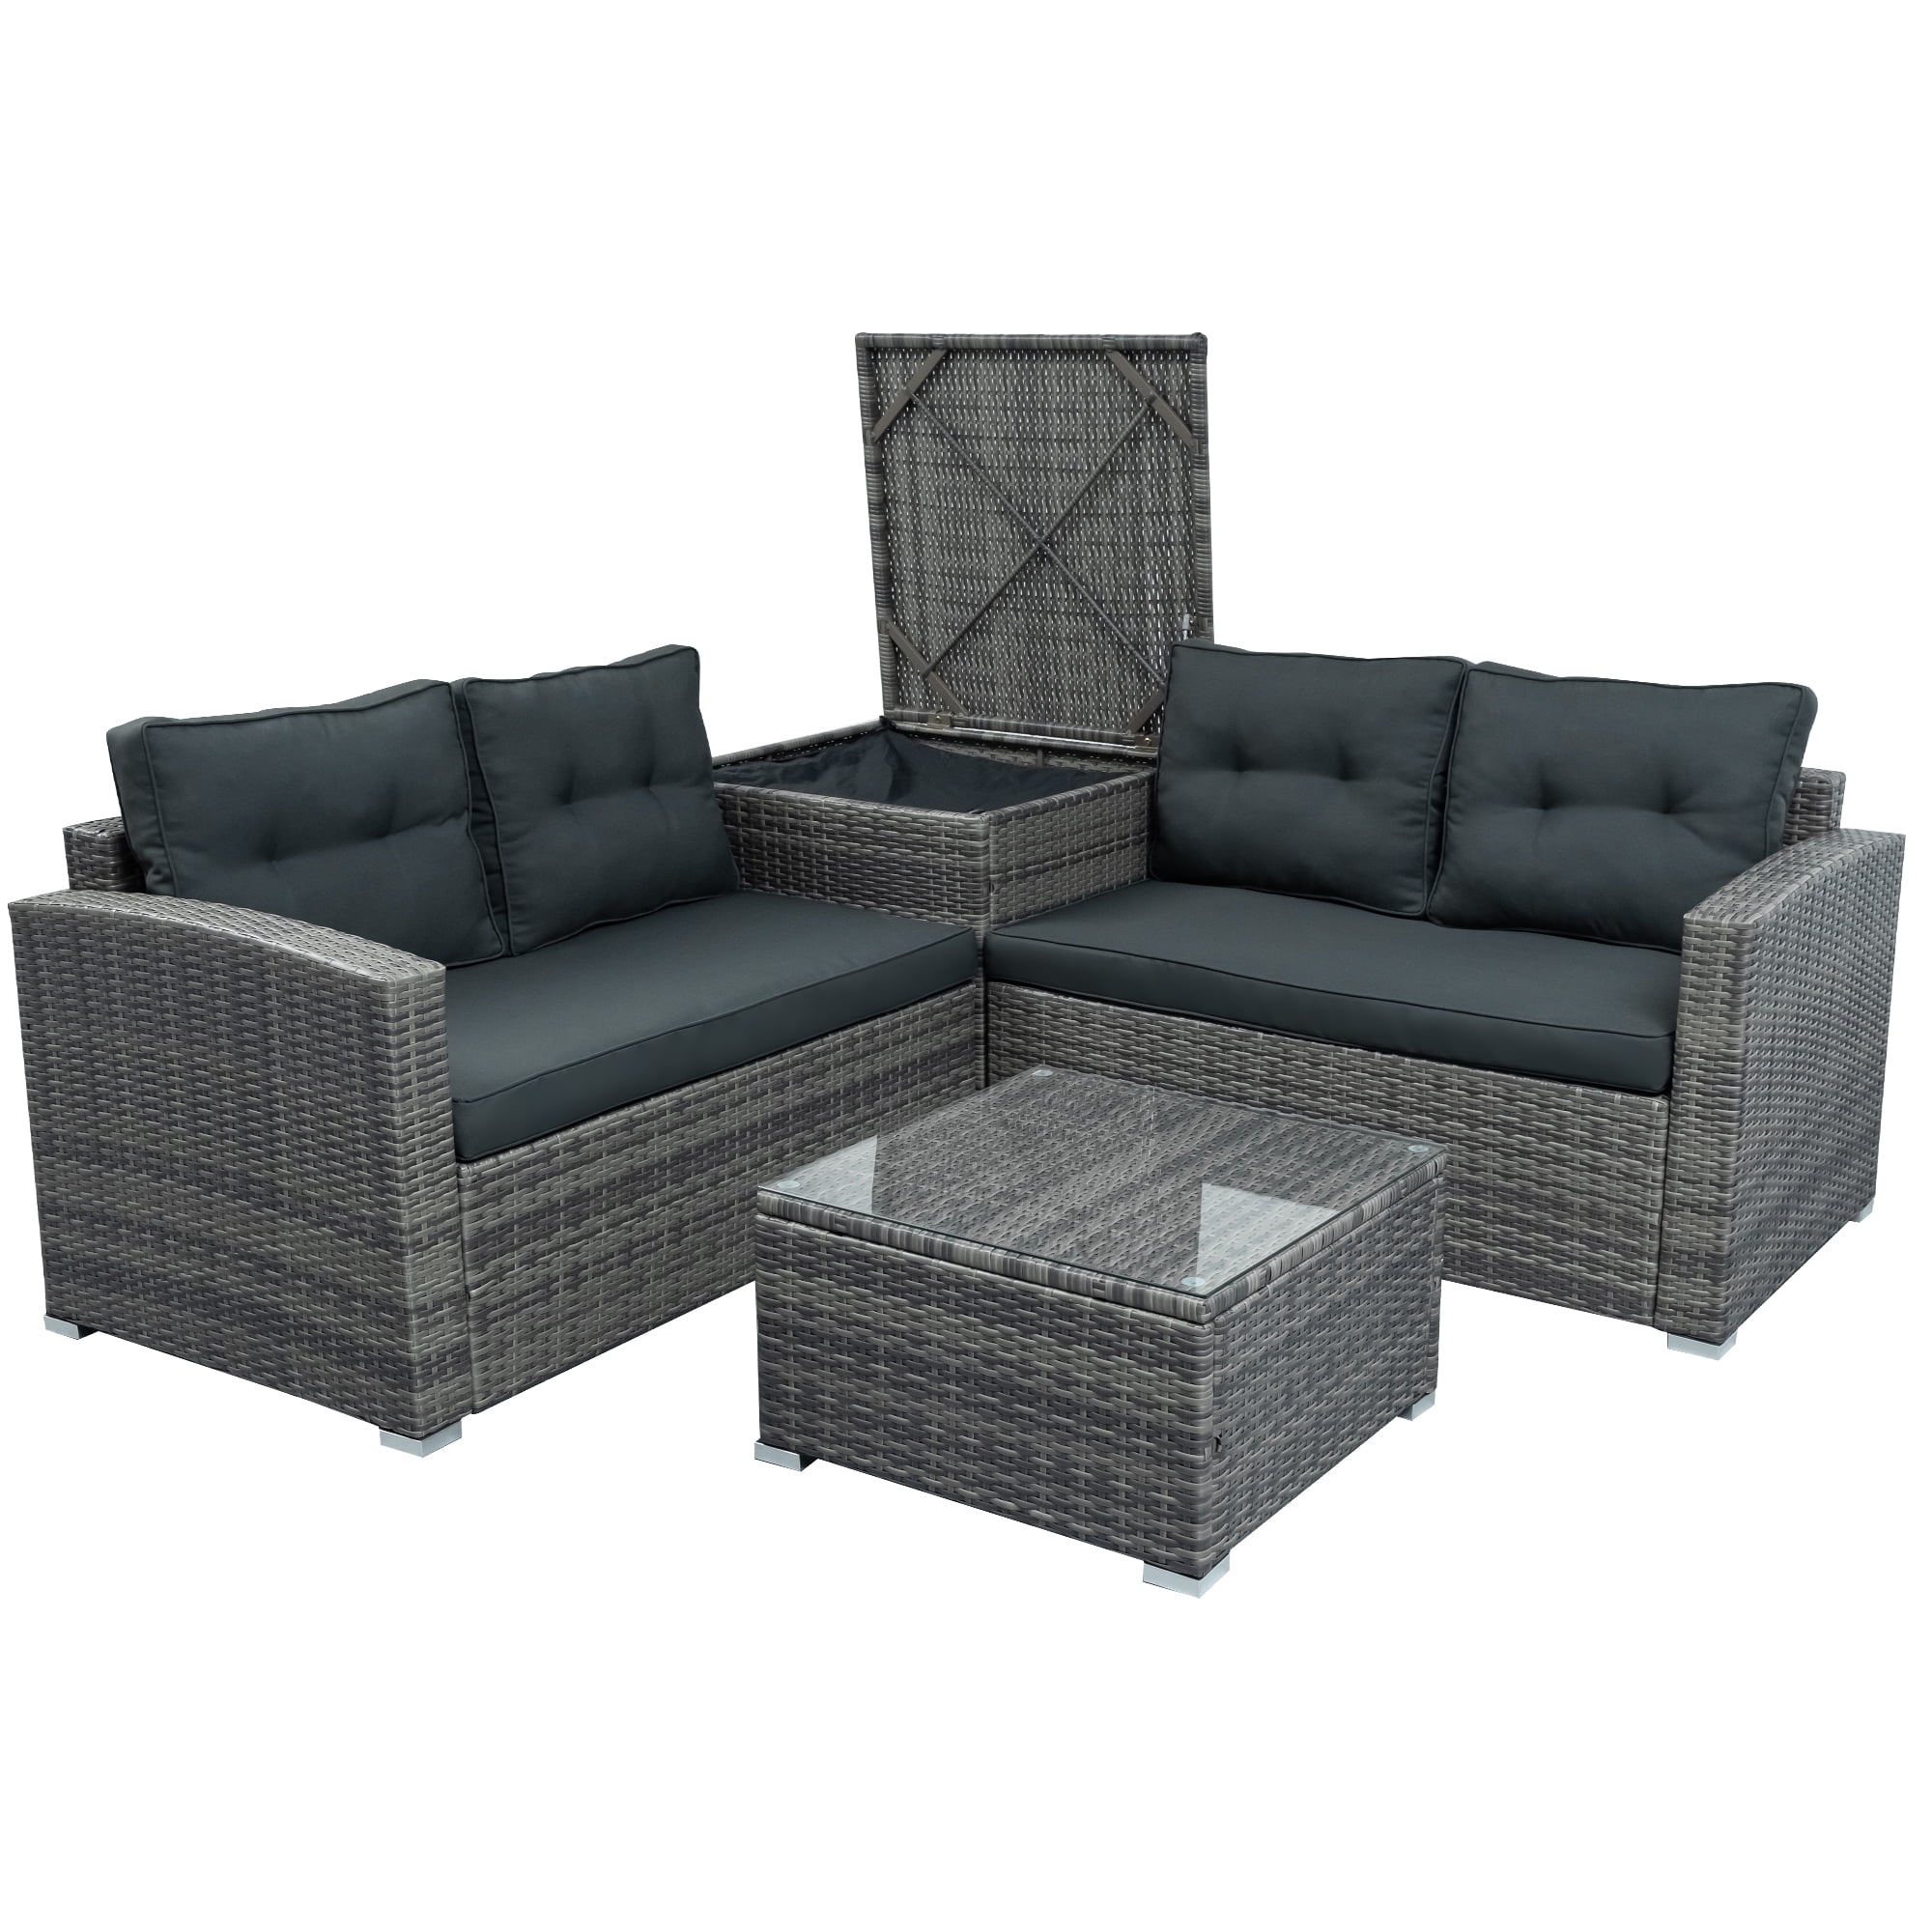 Gray Wicker Patio Furniture Sets On For, Wicker Patio Conversation Set Gray